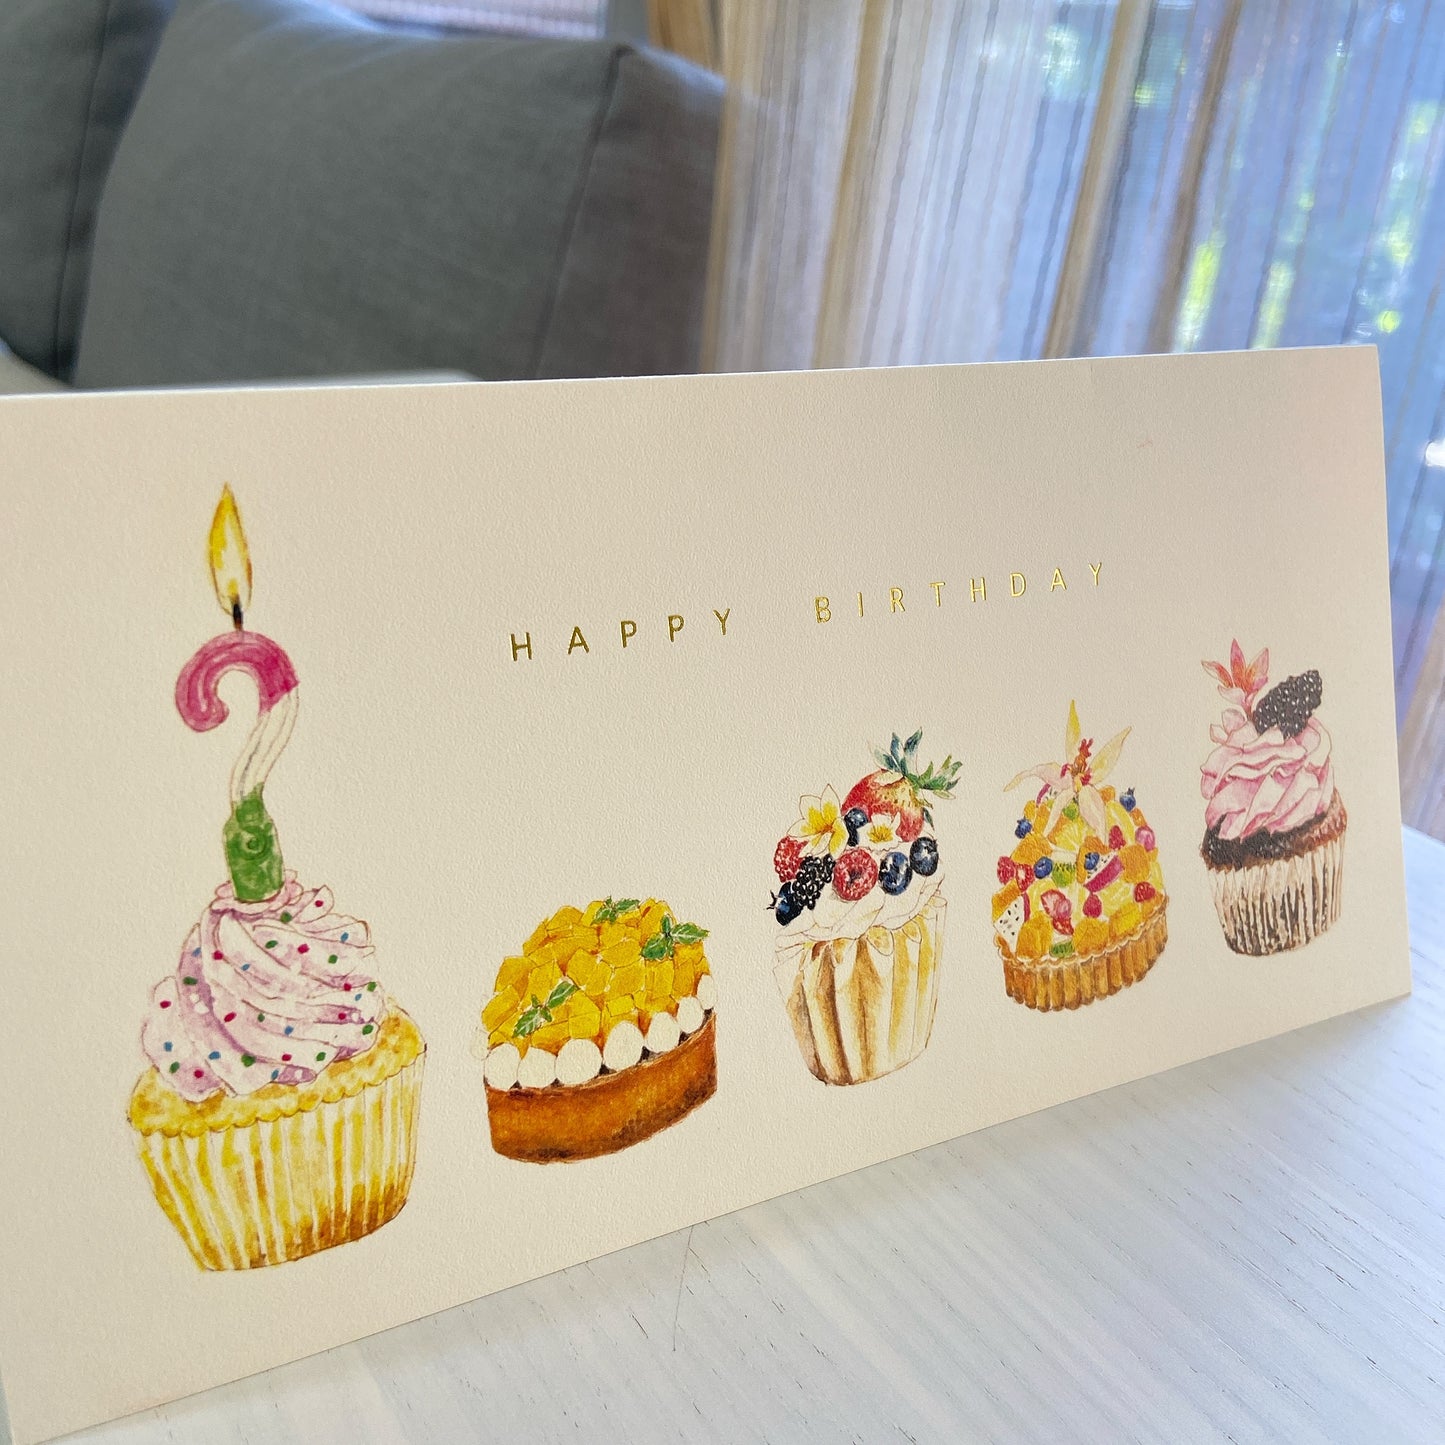 Homemade cupcake birthday card with an envelope